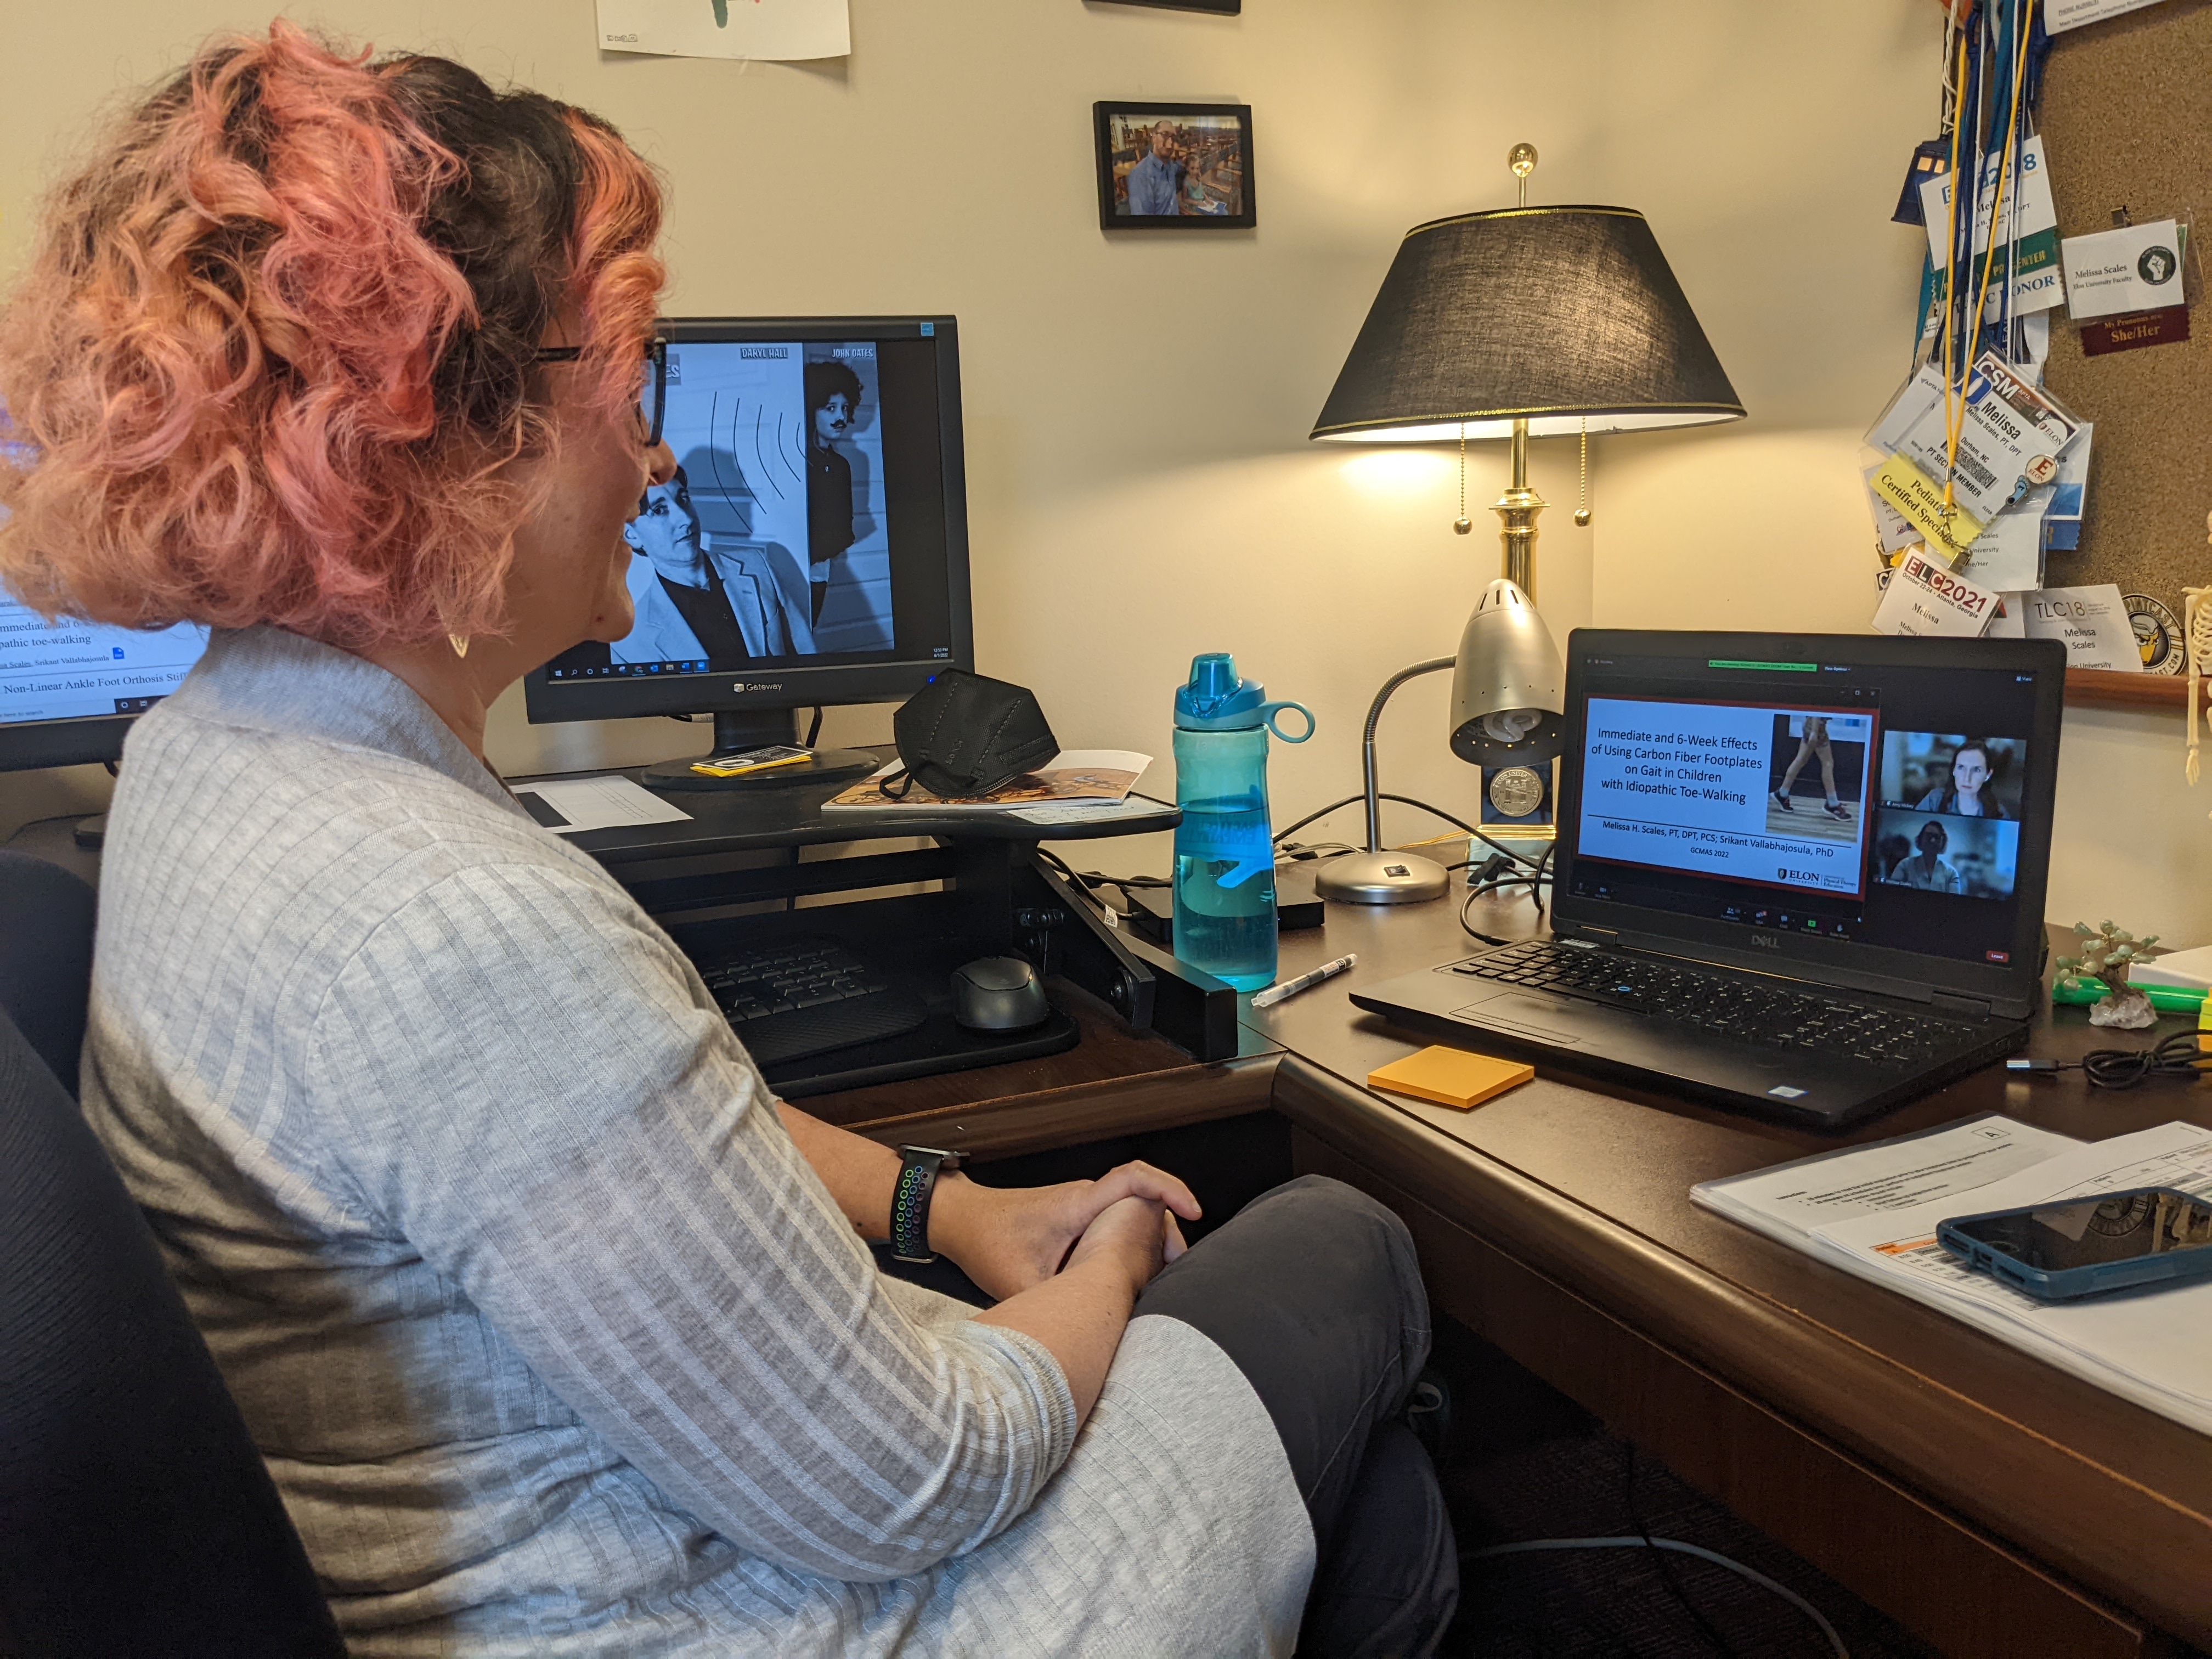 woman with pink curly hair sitting in office chair facing laptop